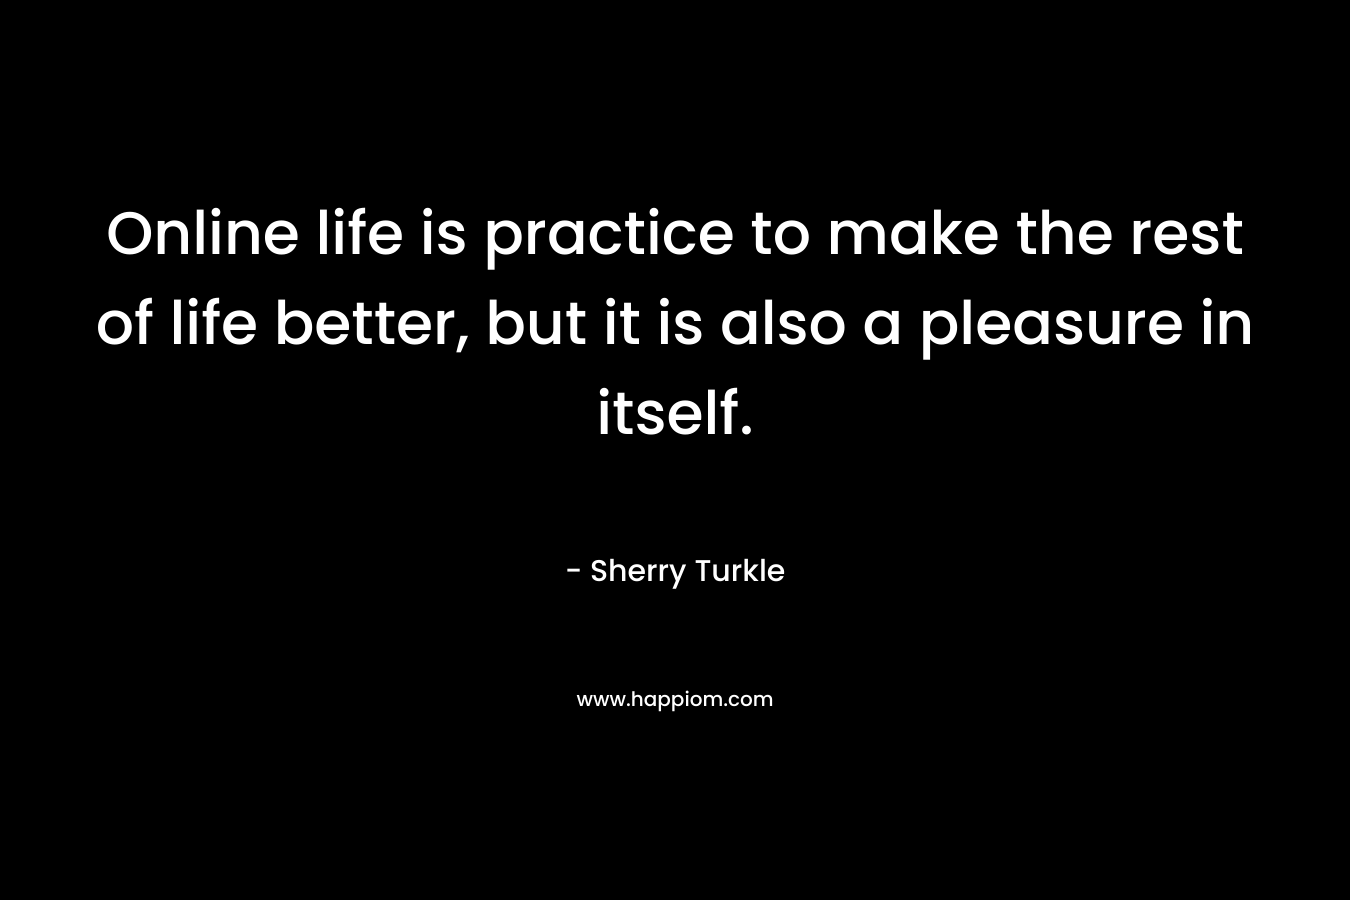 Online life is practice to make the rest of life better, but it is also a pleasure in itself.